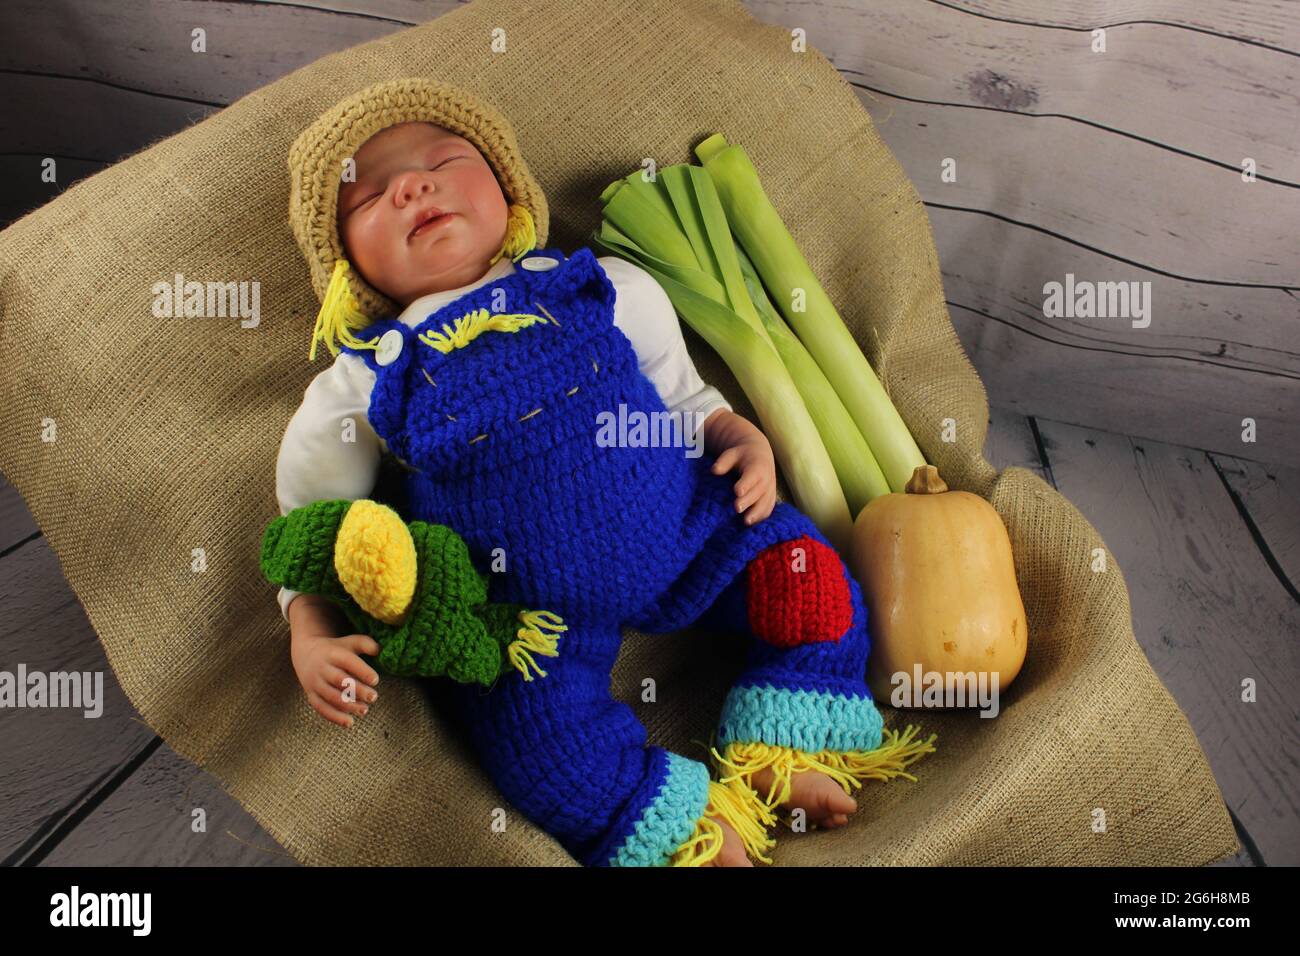 Sleeping baby wearing knitted dungarees asleep on hessian sack surrounded by autumn harvest. Baby farmer concept represented by a reborn doll: Stock Photo